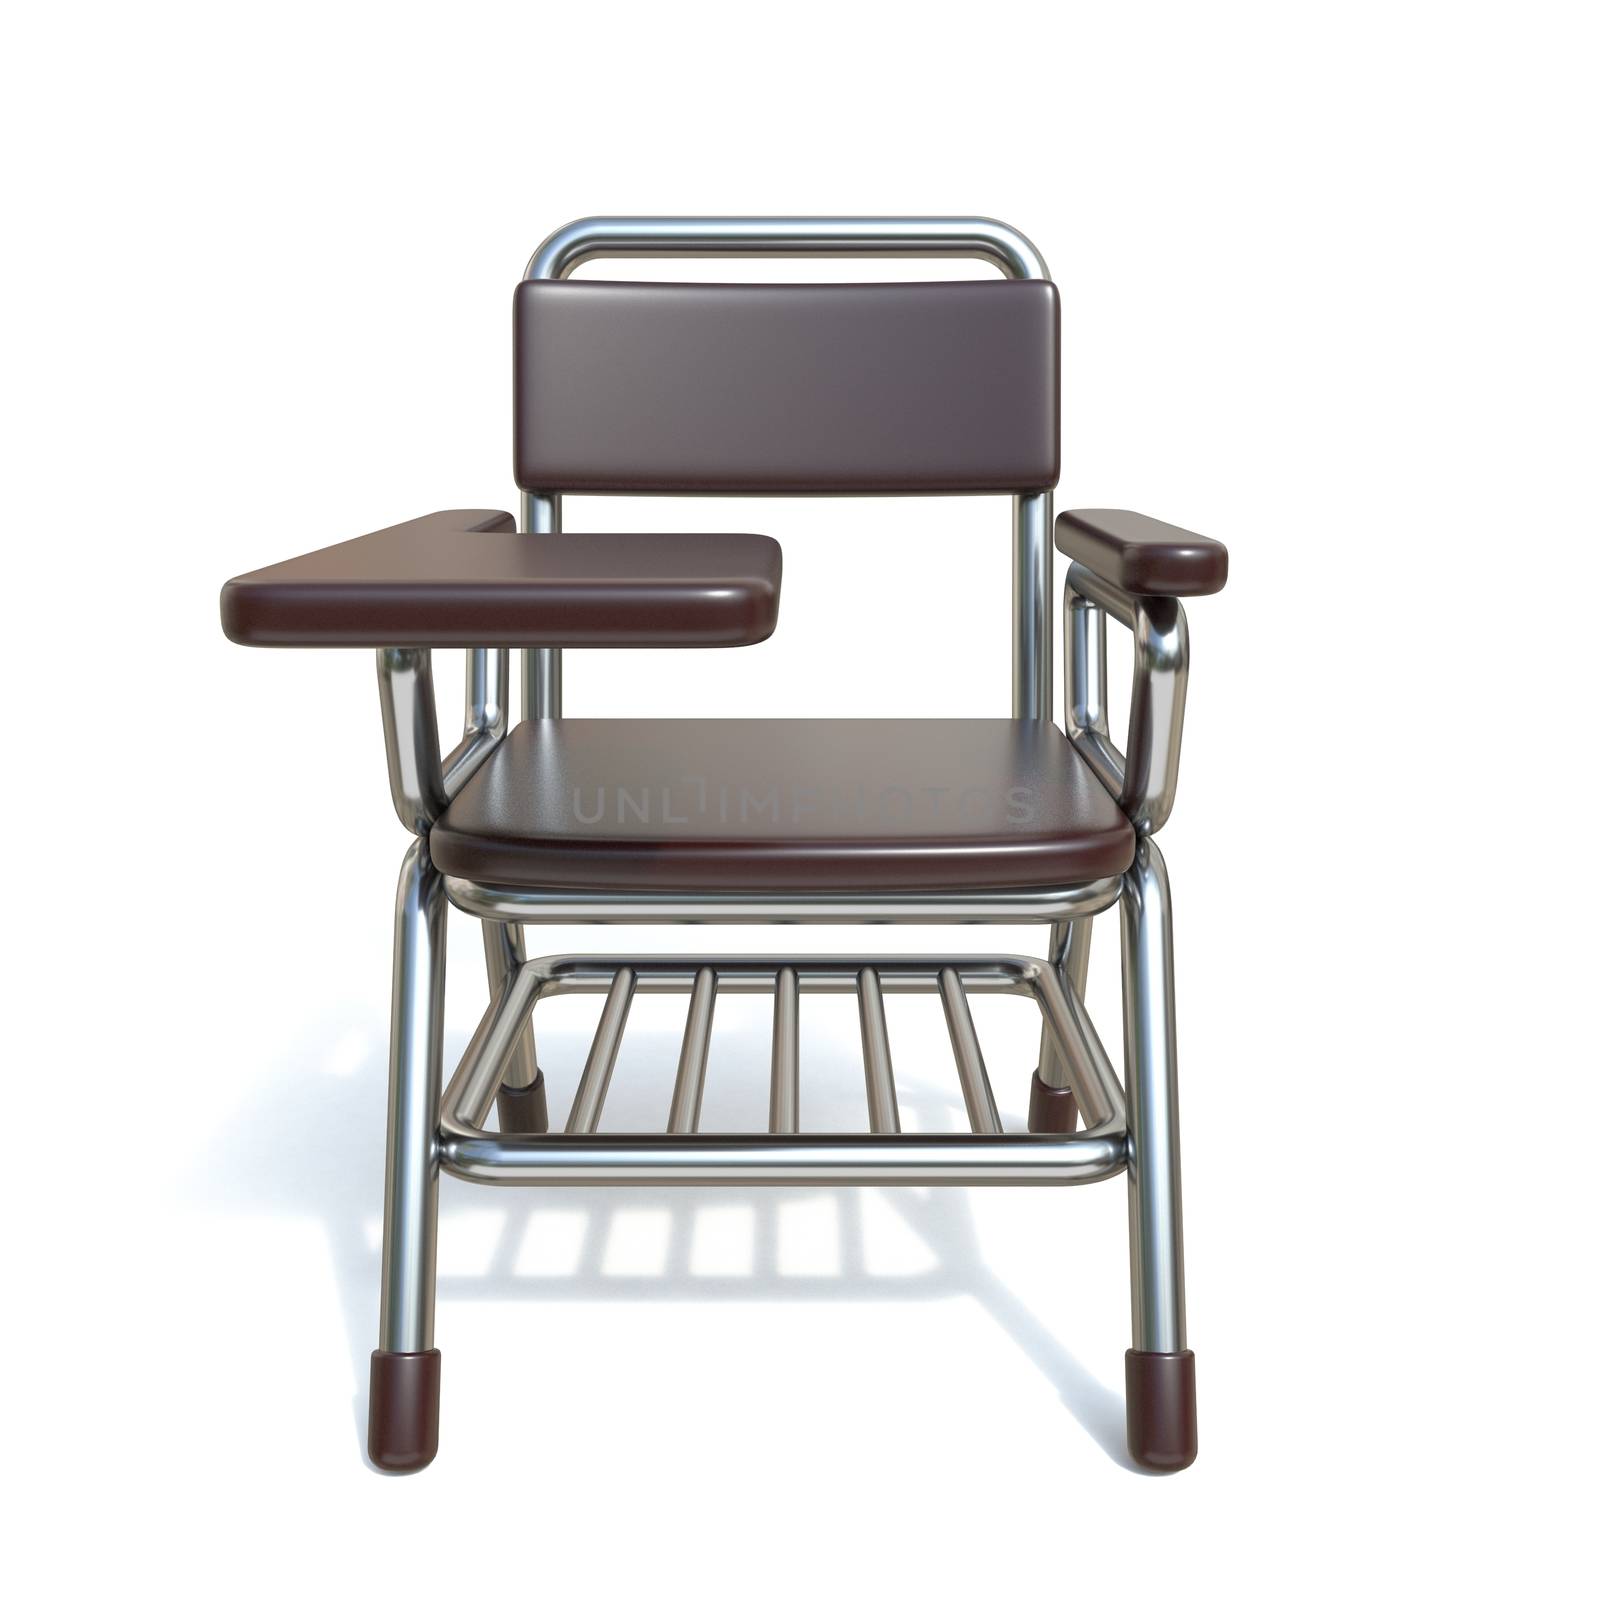 Writing pad student chair Front view 3D render illustration isolated on white background